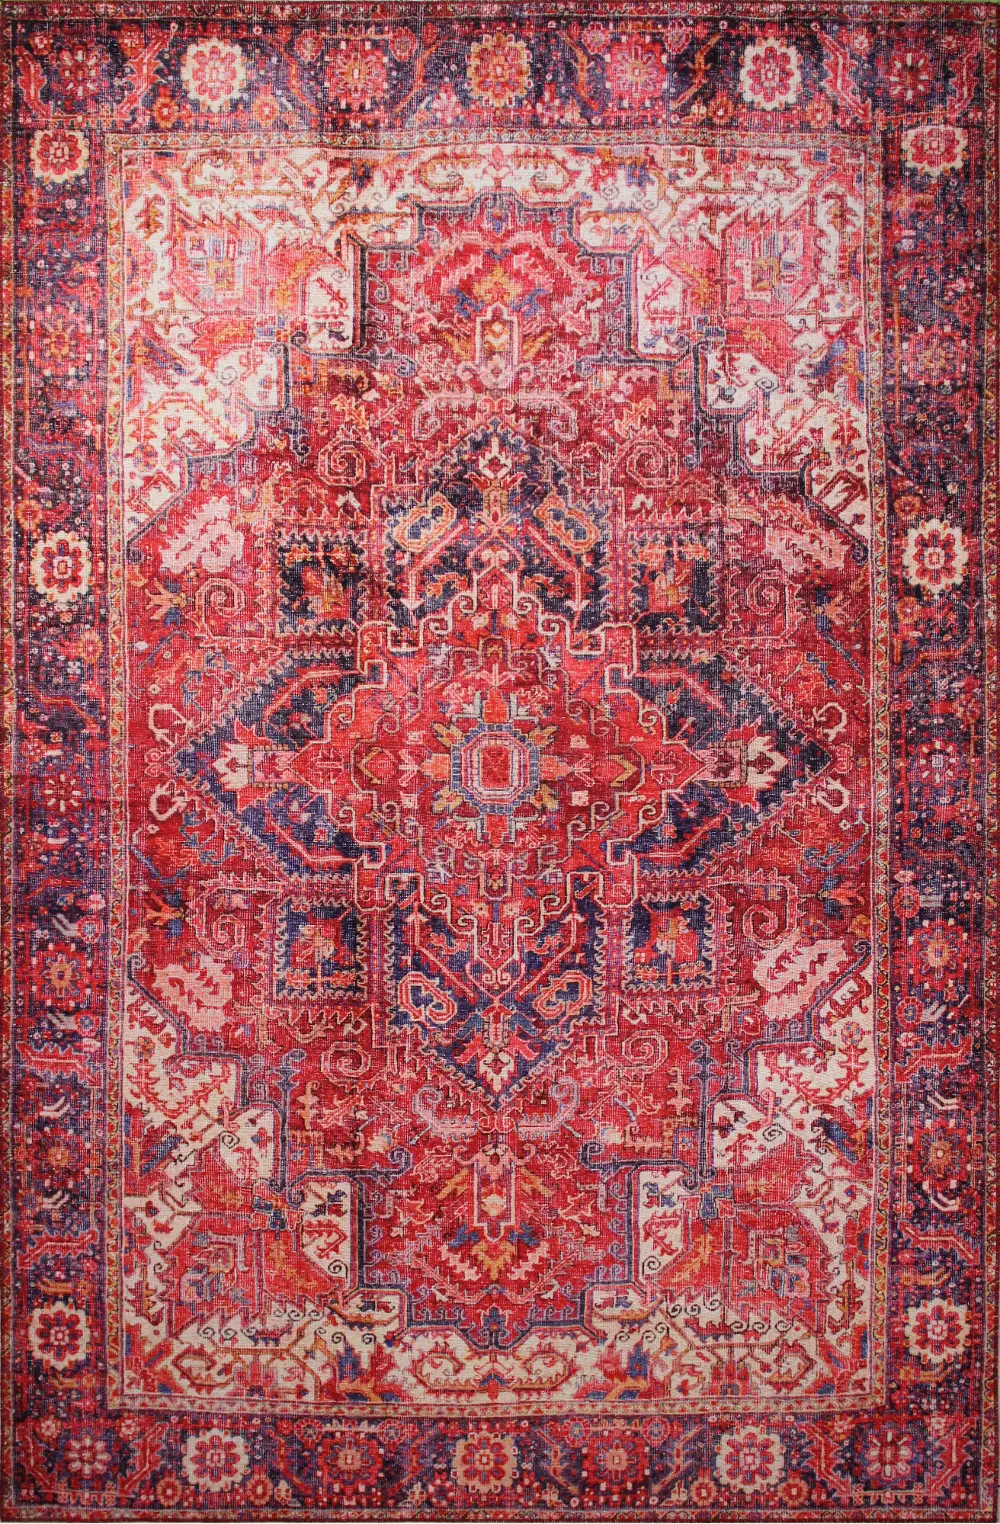 I166-RU-76X96-NR101 8 x 10 Large Traditional Zac Blue and Red Area Rug - Impressions-1